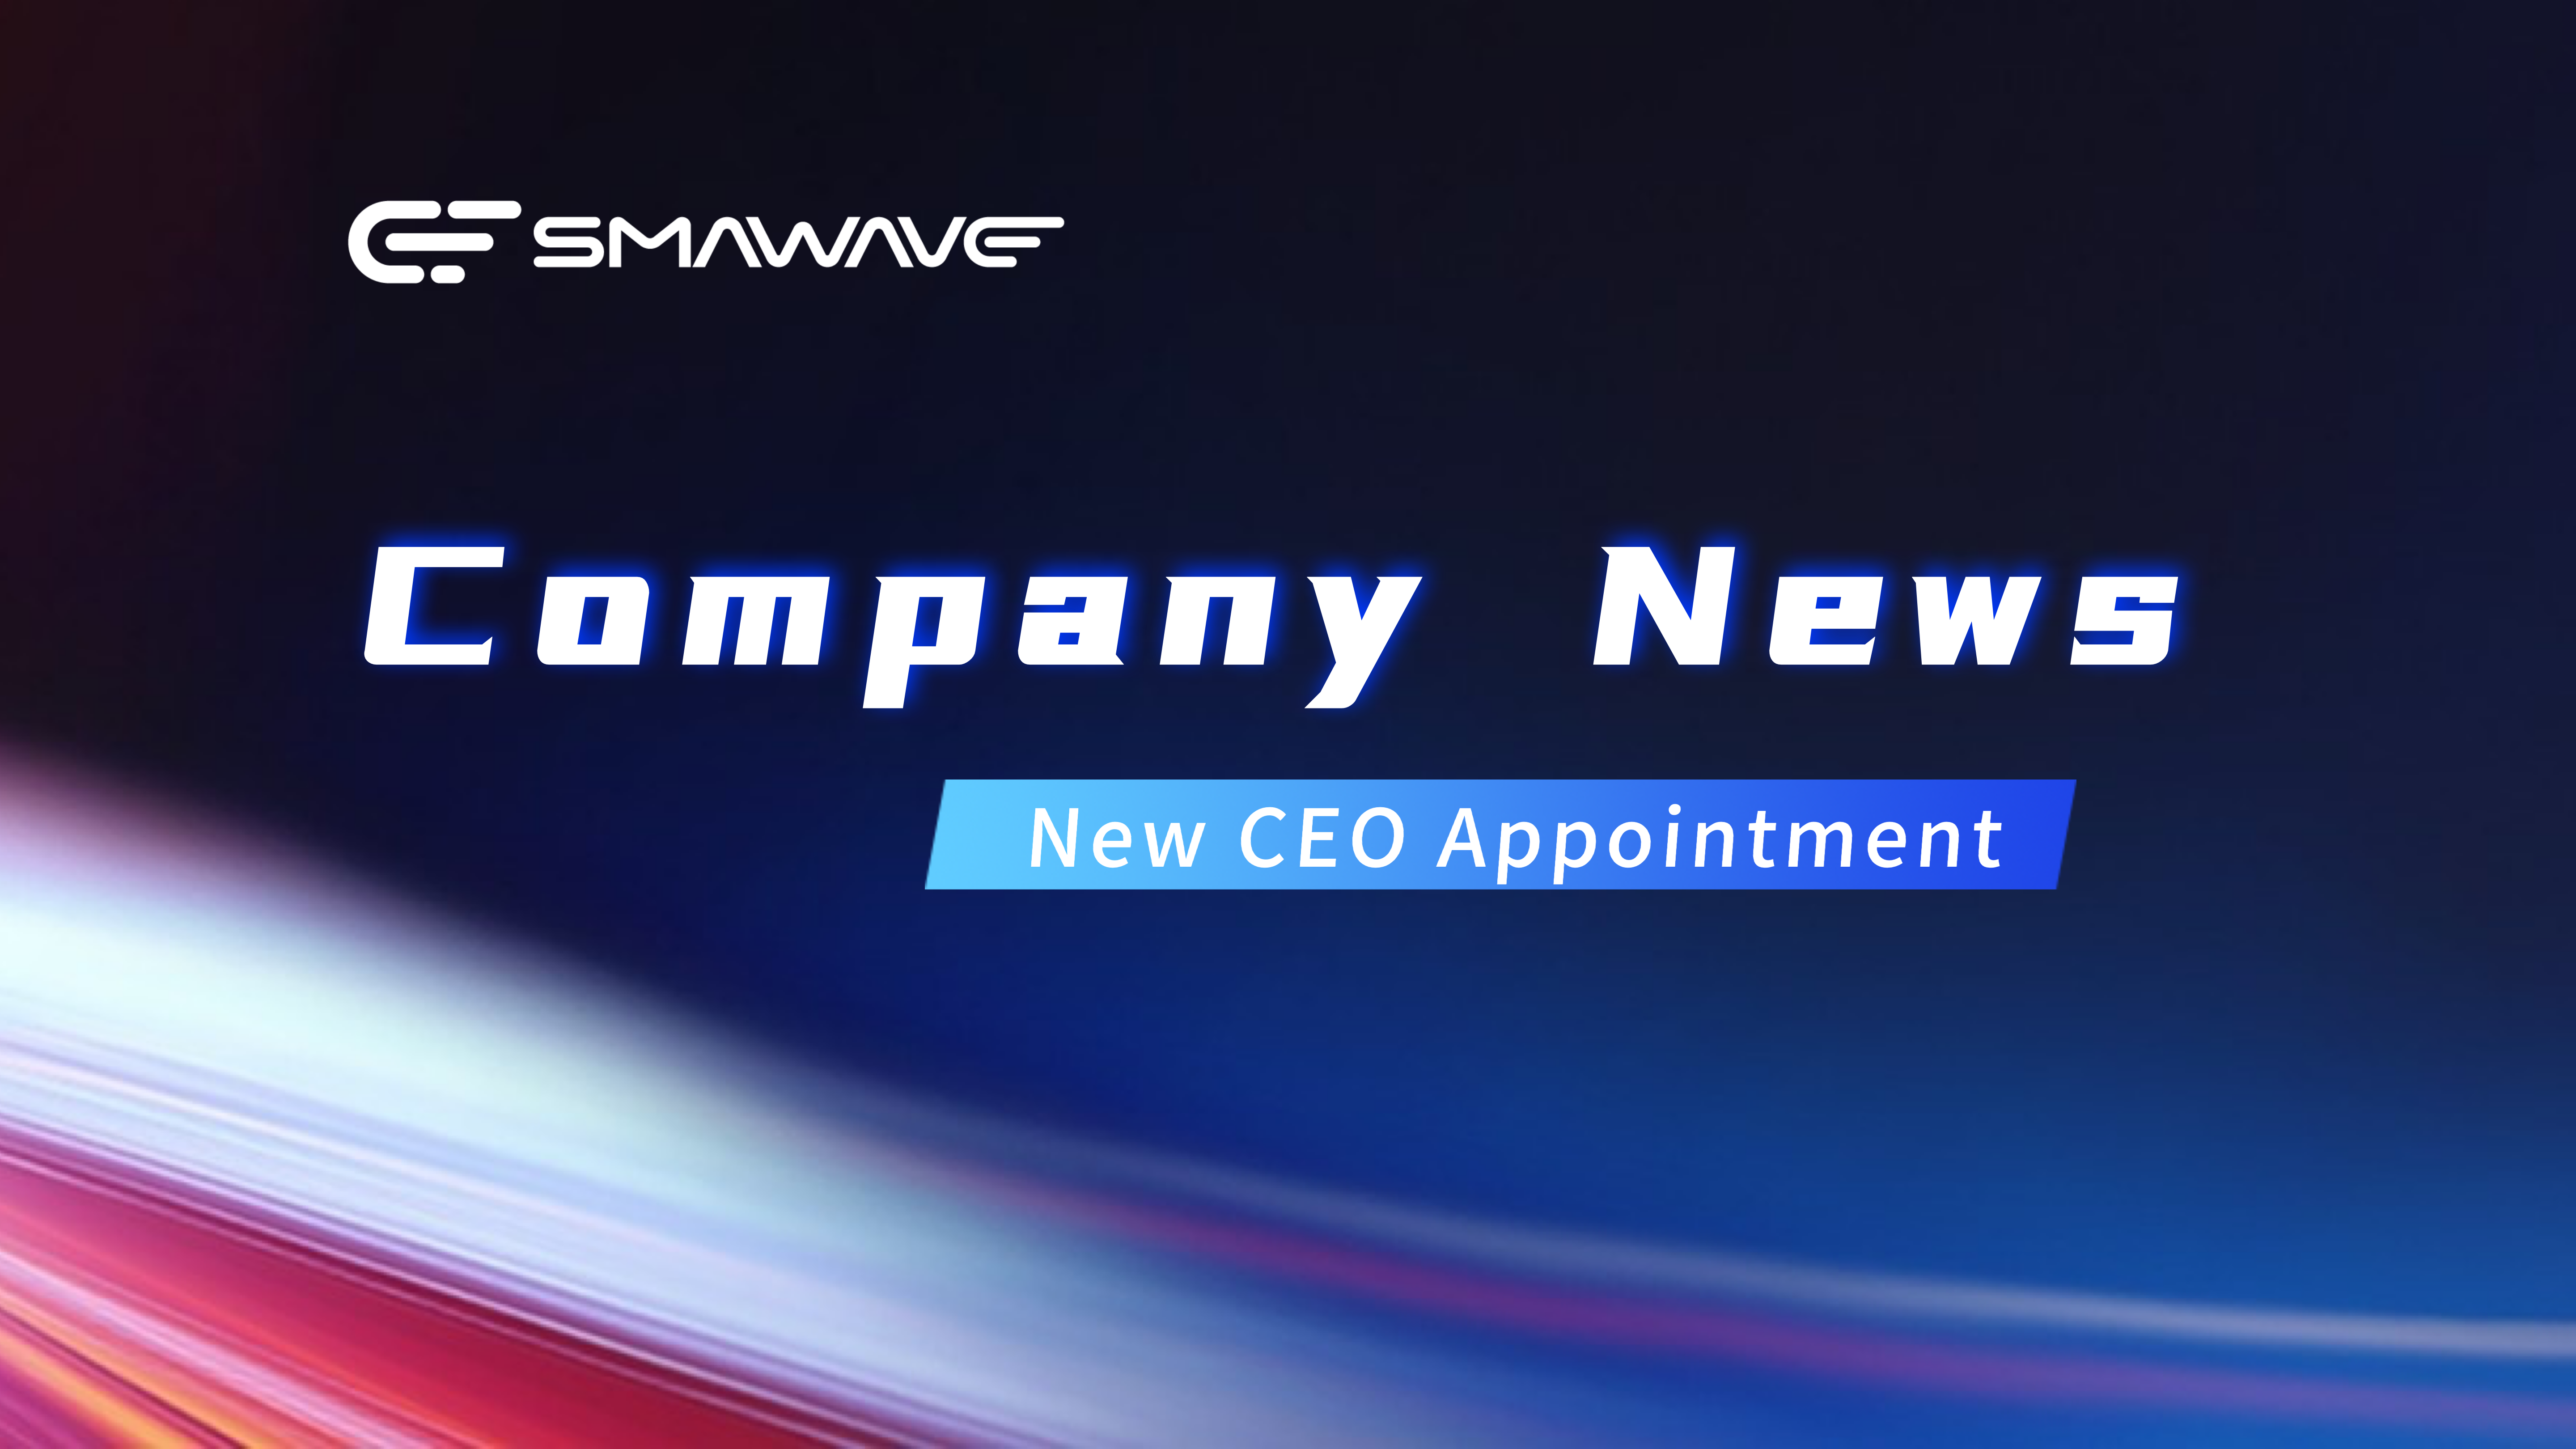 Smawave appoints Jerry Li as new CEO, continuing its path of success